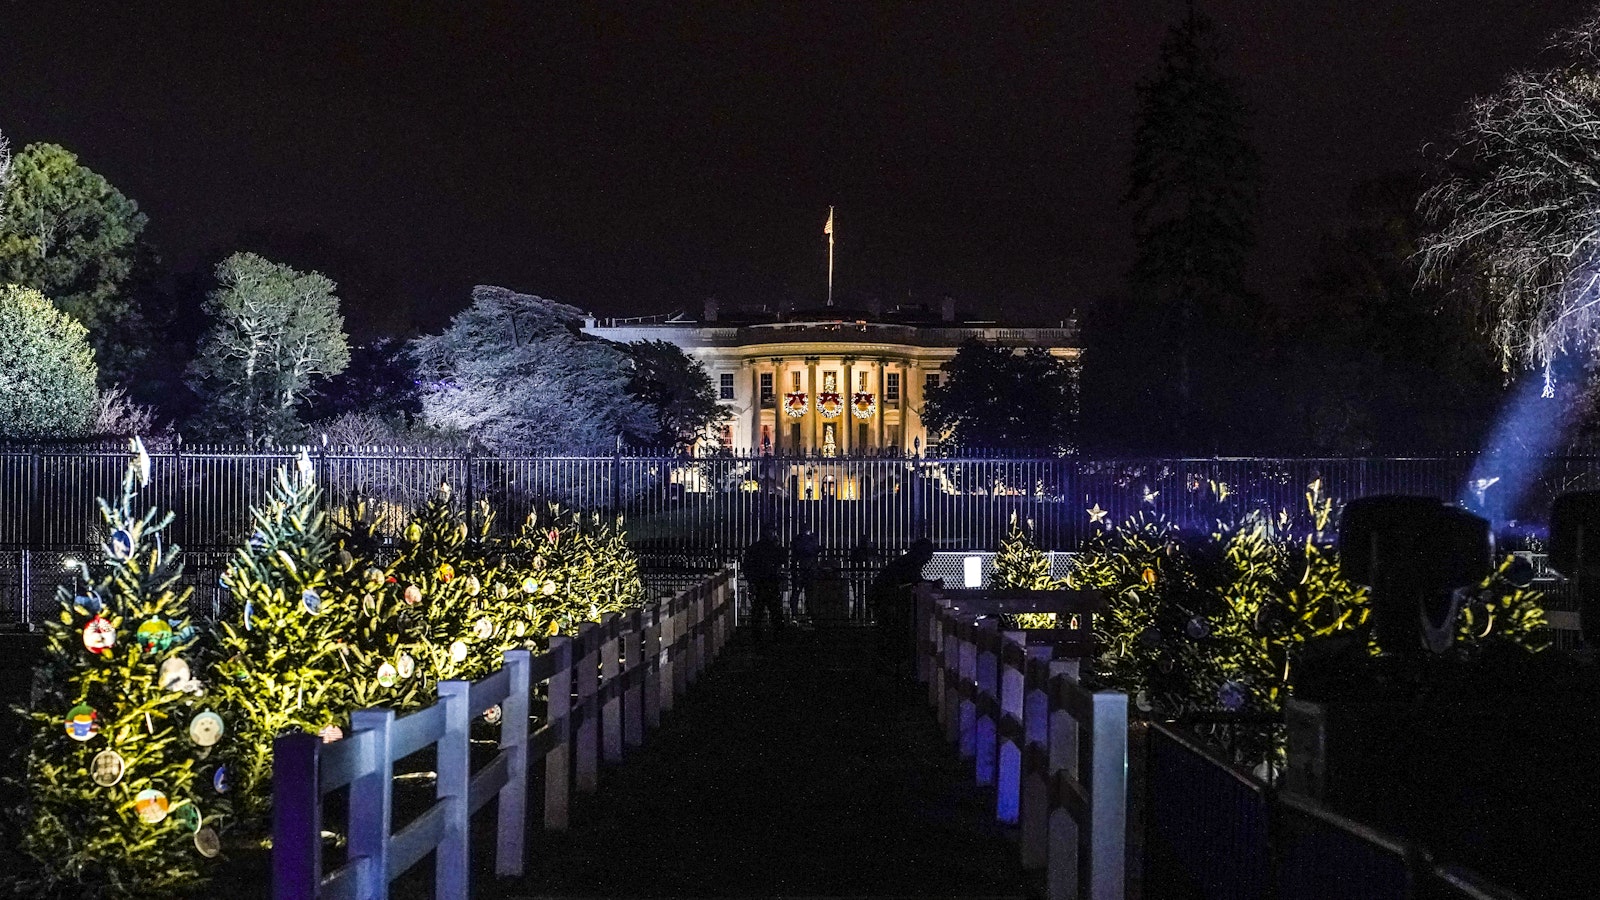 Two rows of illuminated evergreen trees, behind short wooden fences, line a pathway that leads up to an illuminated White House at night